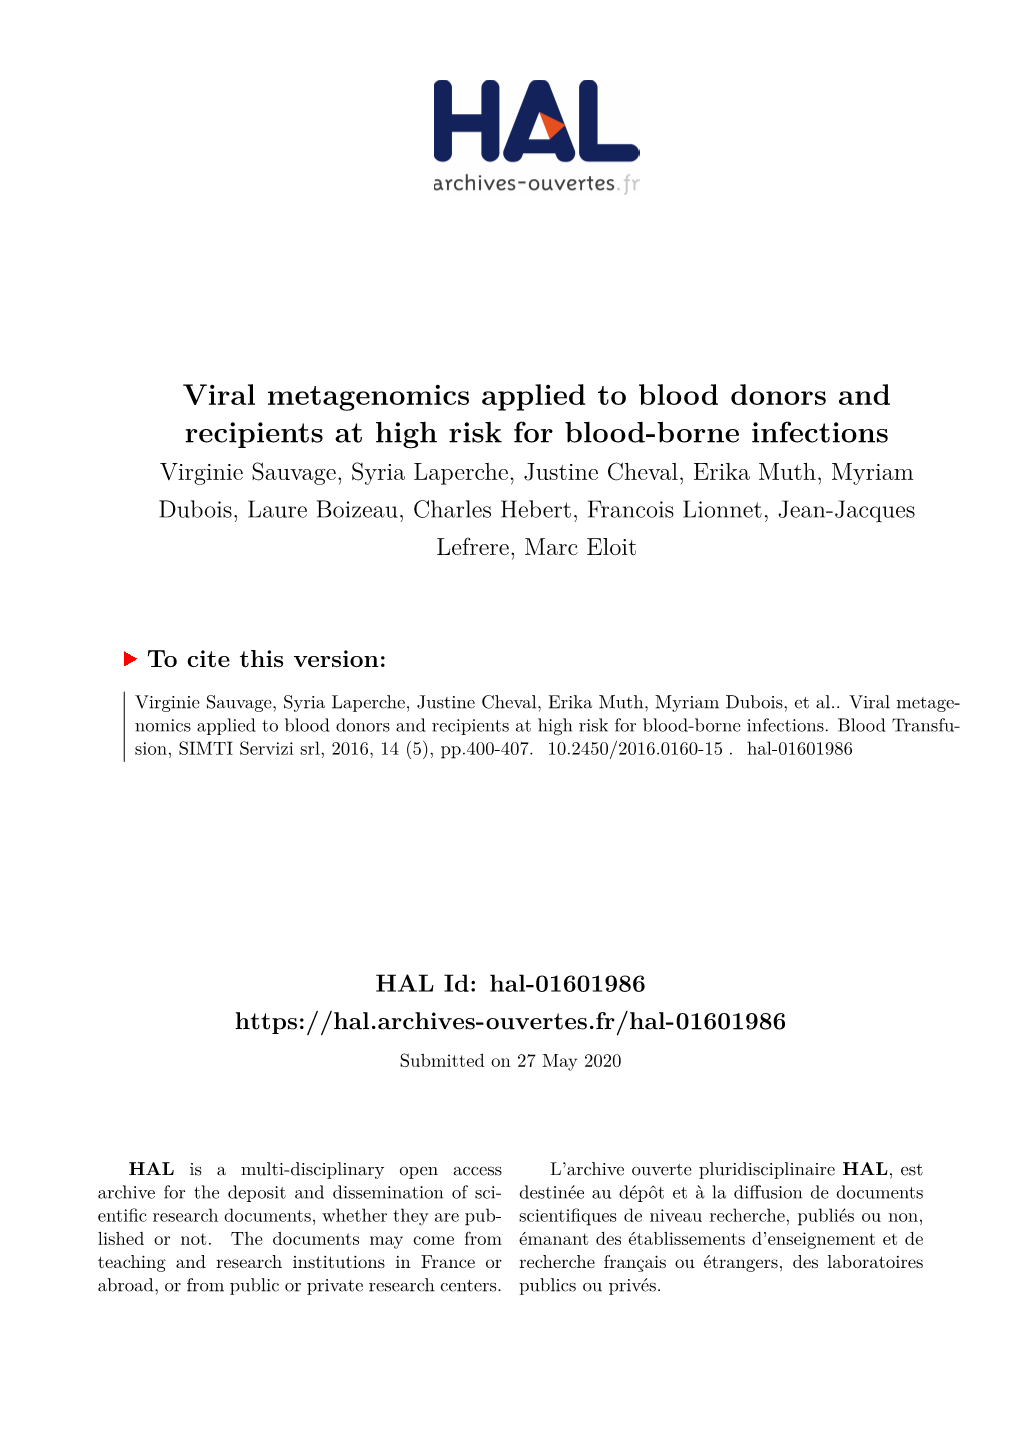 Viral Metagenomics Applied to Blood Donors and Recipients at High Risk